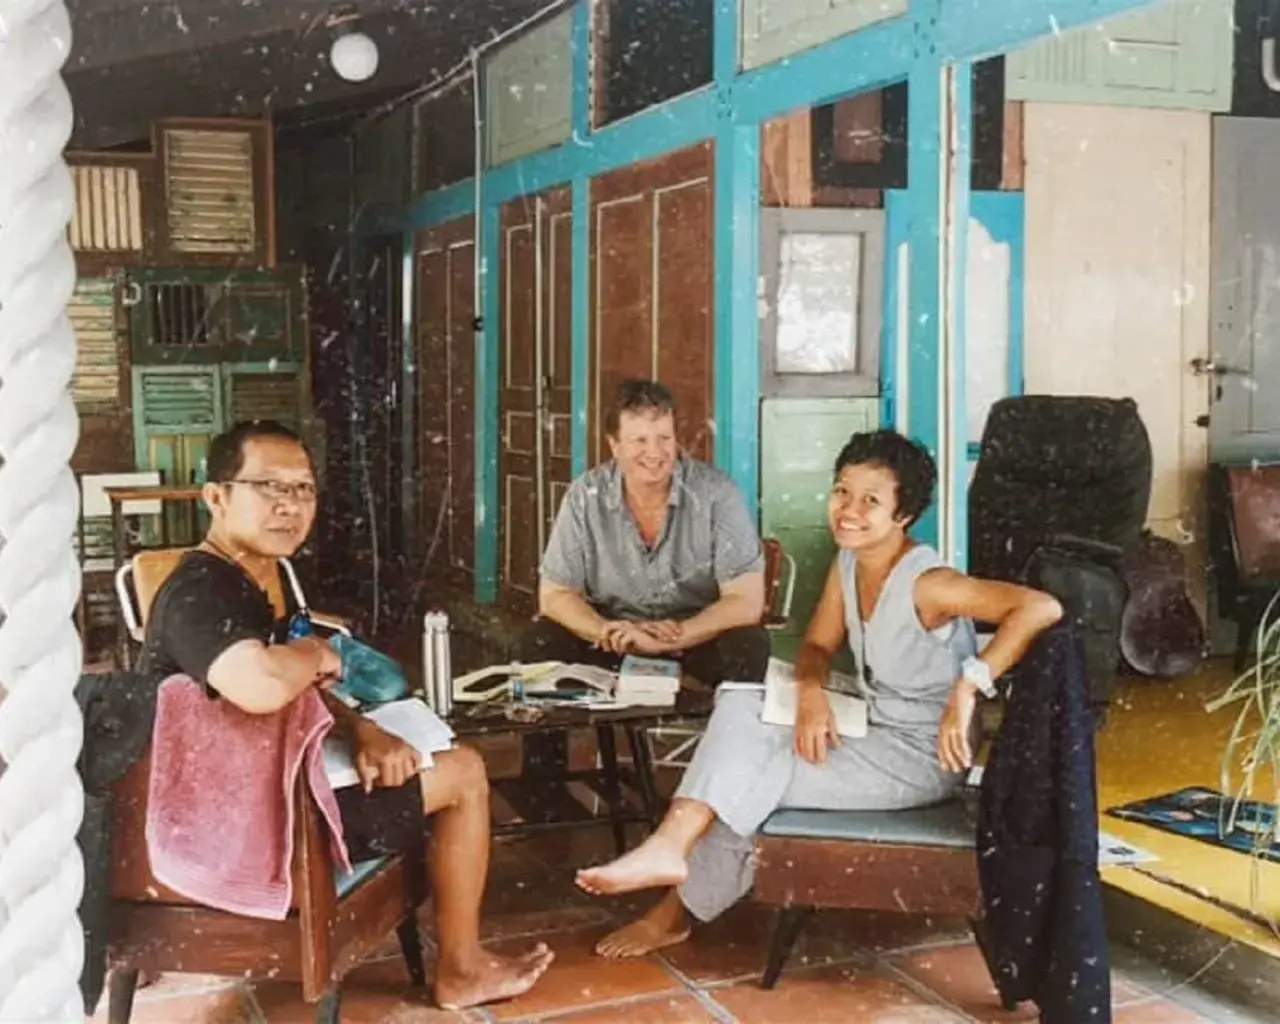 EgoPo Classic Theater, lead collaborators for Ramayana, during a script development retreat at Papermoon's workshop, 2020, Yogyakarta, Indonesia. Pictured from L to R: Ibid Surgana Yuga, Lane Savadove, and Maria Sulistyani. Photo courtesy of Papermoon Puppet Theater.